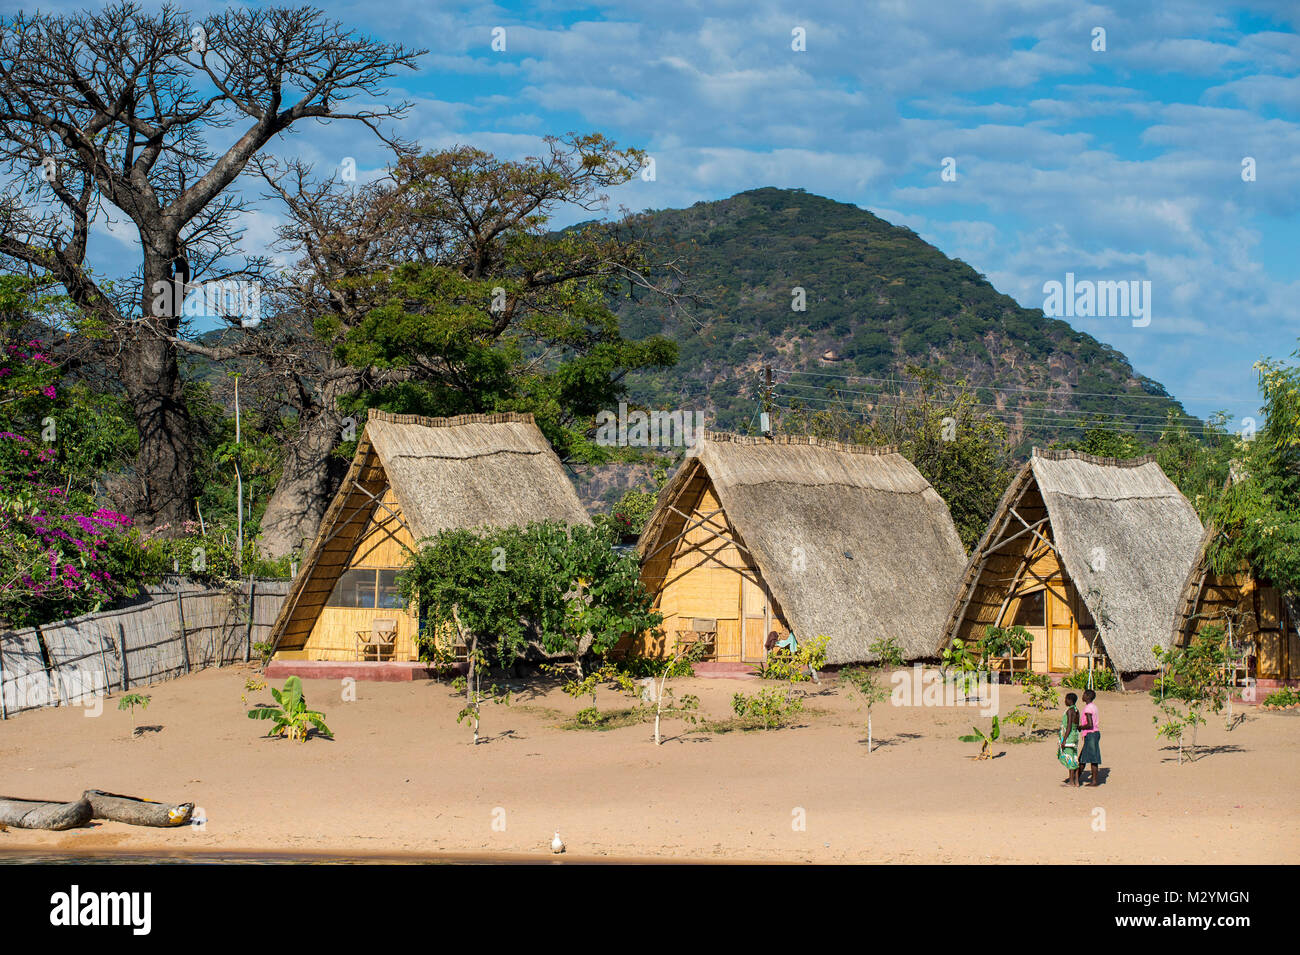 Resort build in the traditional way on Cape Maclear, Lake Malawi, Malawi, Africa Stock Photo